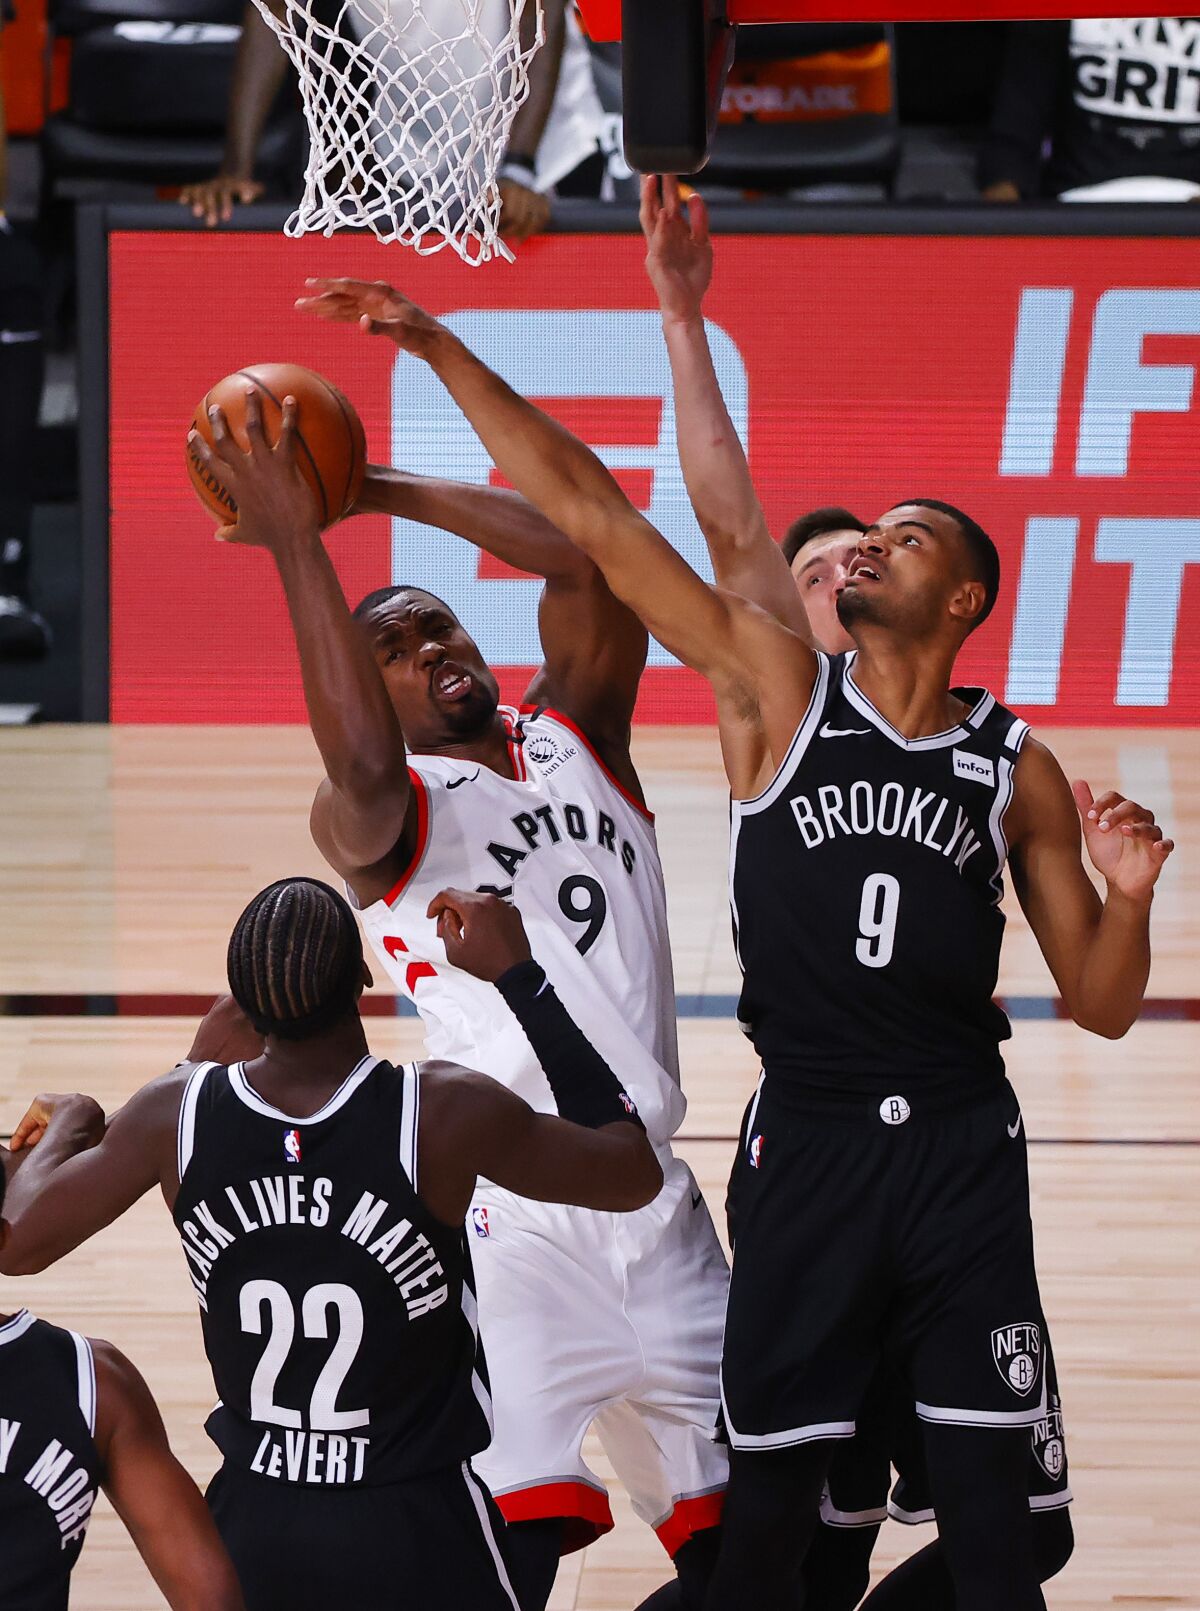 Toronto Raptors' Serge Ibaka, top left, grabs a rebound against Brooklyn Nets' Timothe Luwawu-Cabarrot, right, and Caris LeVert (22) during the third quarter of Game 1 of an NBA basketball first-round playoff series, Monday, Aug. 17, 2020, in Lake Buena Vista, Fla. (Kevin C. Cox/Pool Photo via AP)